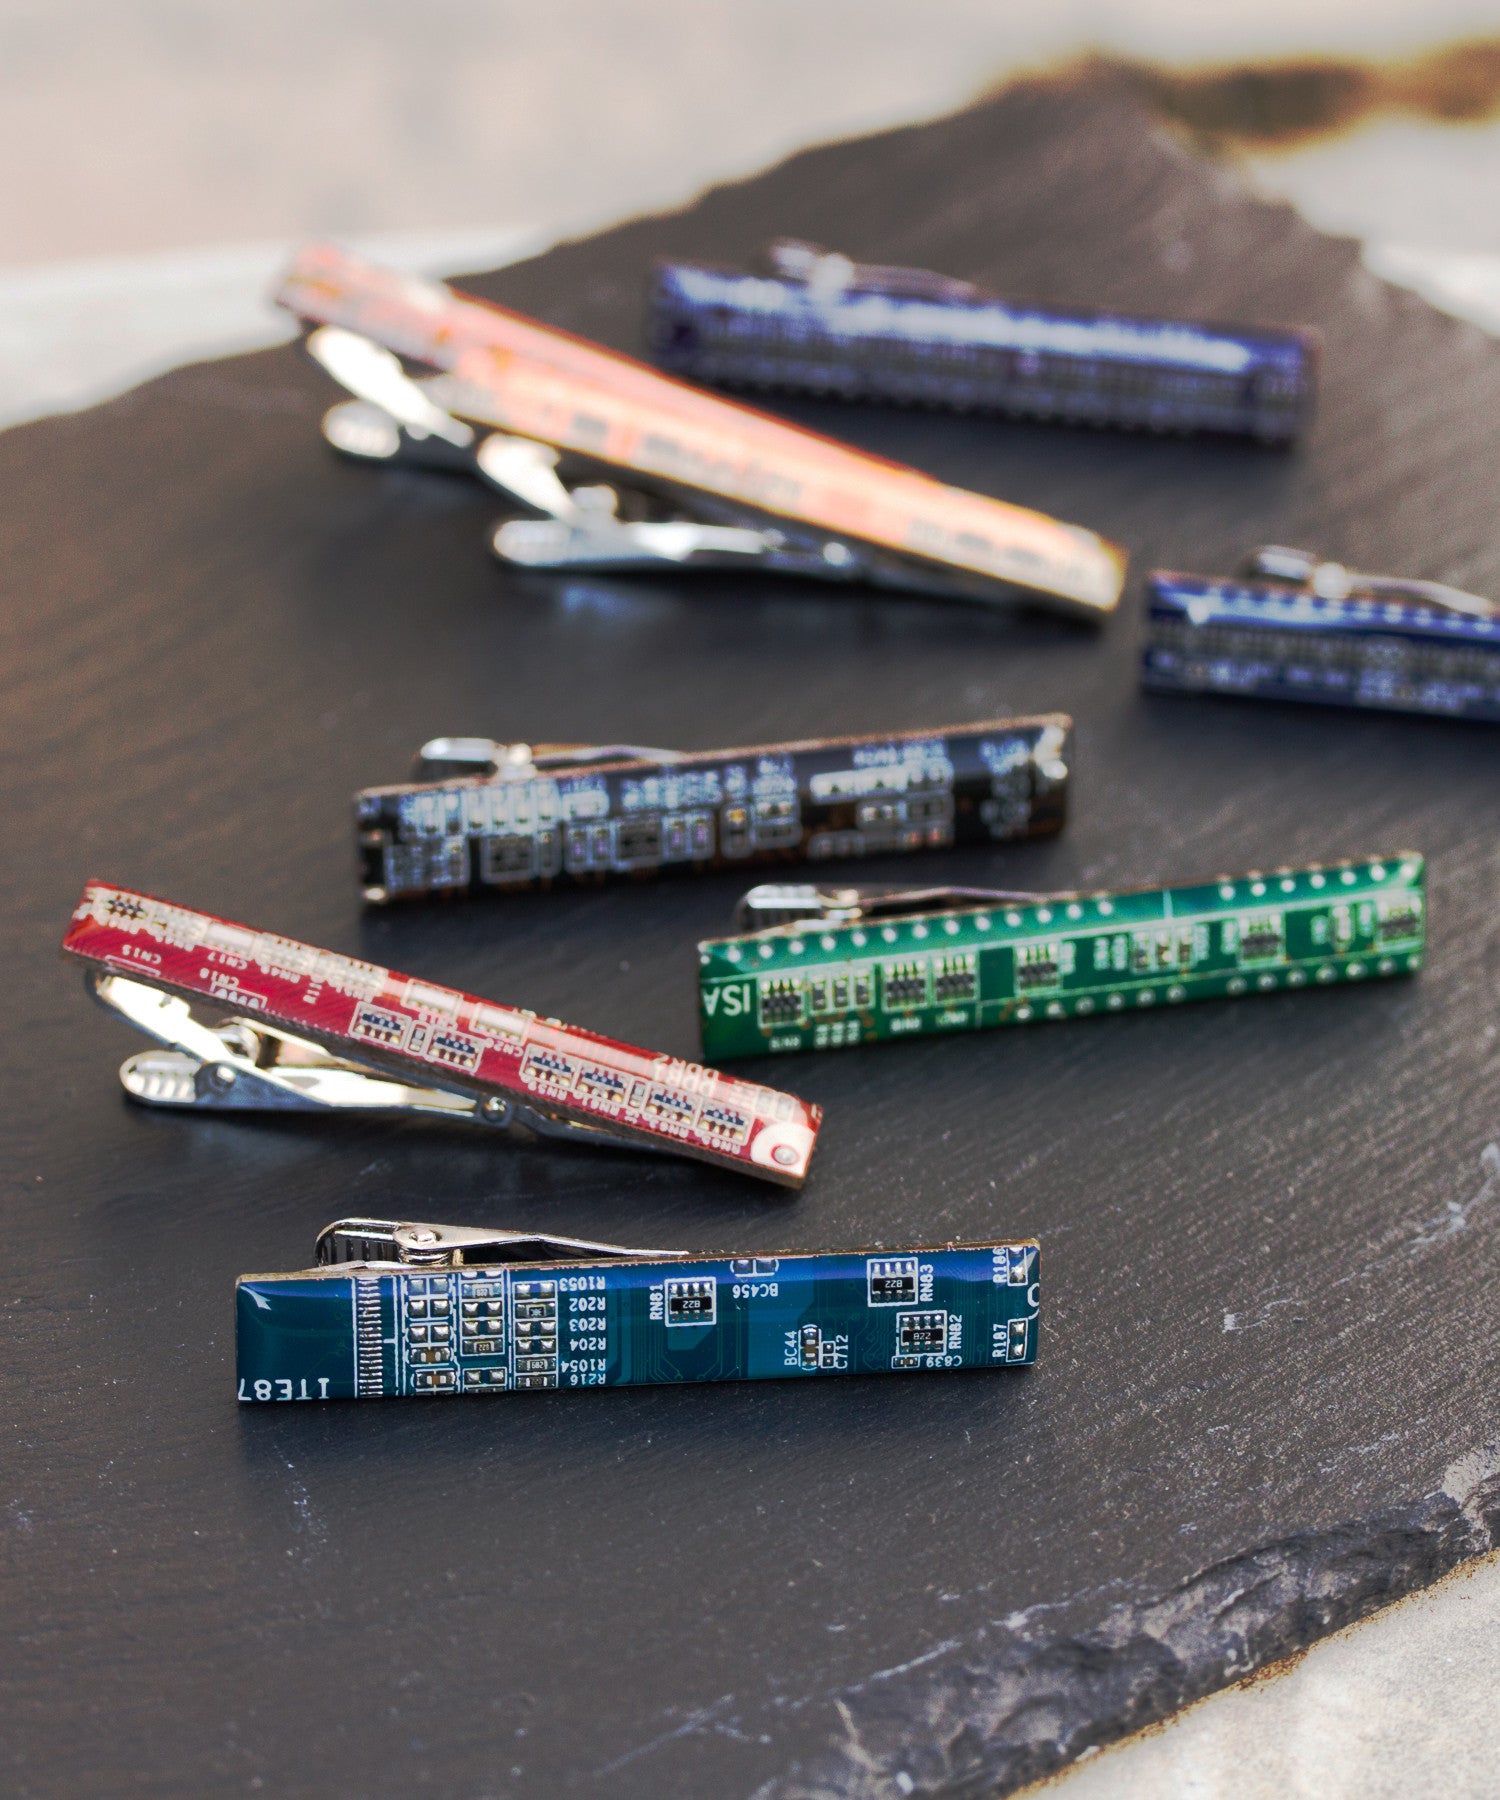 Tie bar made of circuit board